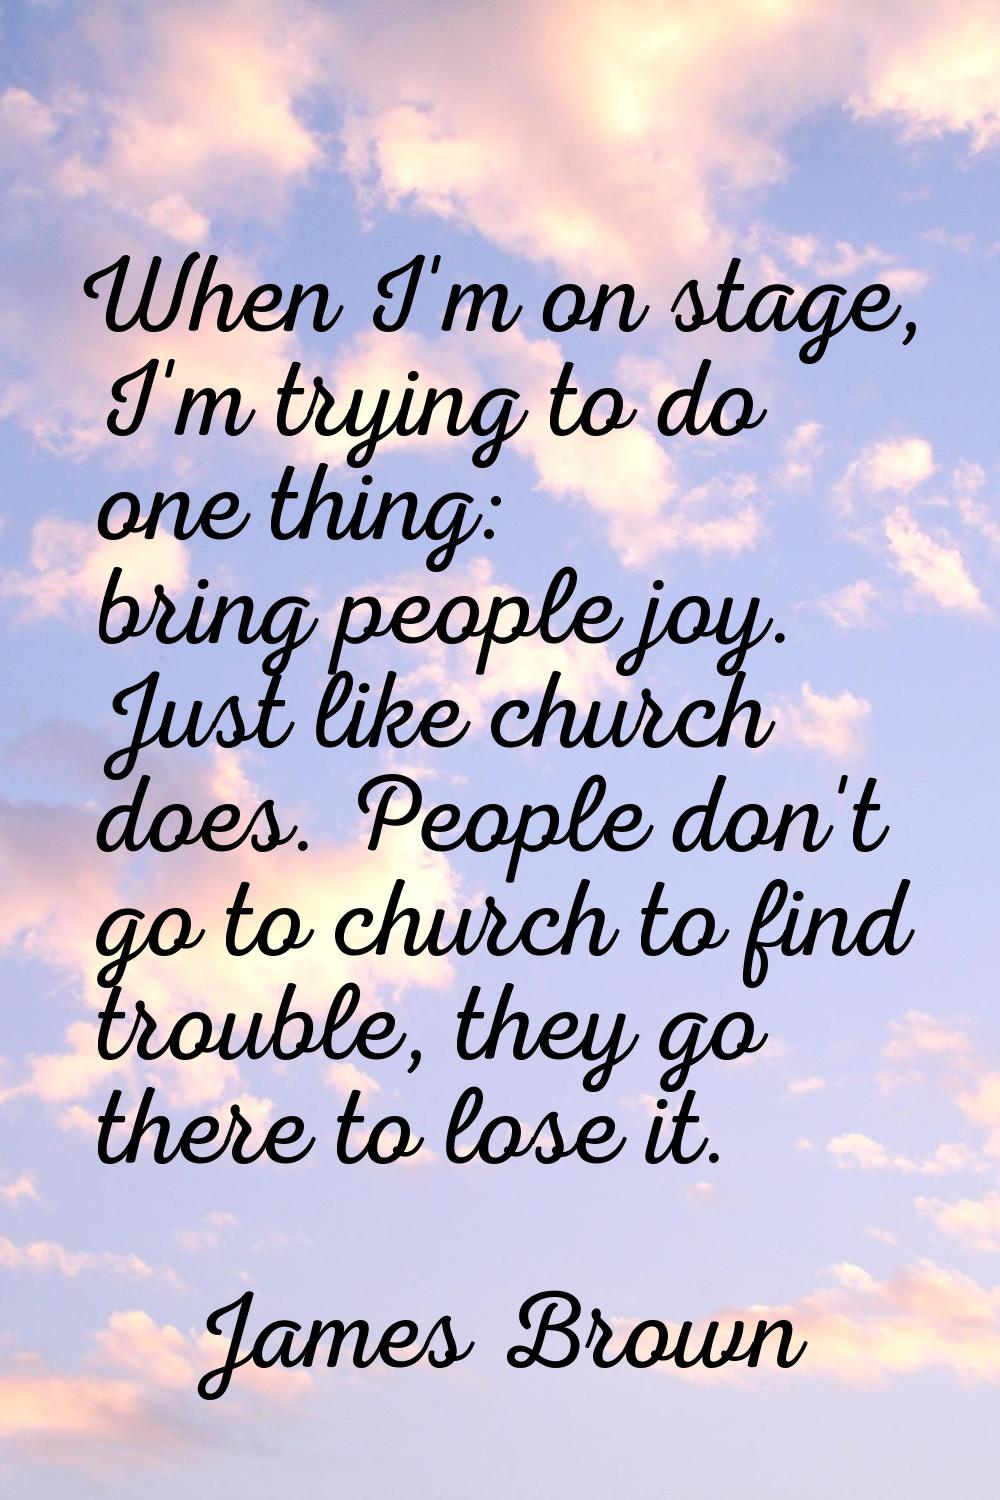 When I'm on stage, I'm trying to do one thing: bring people joy. Just like church does. People don'